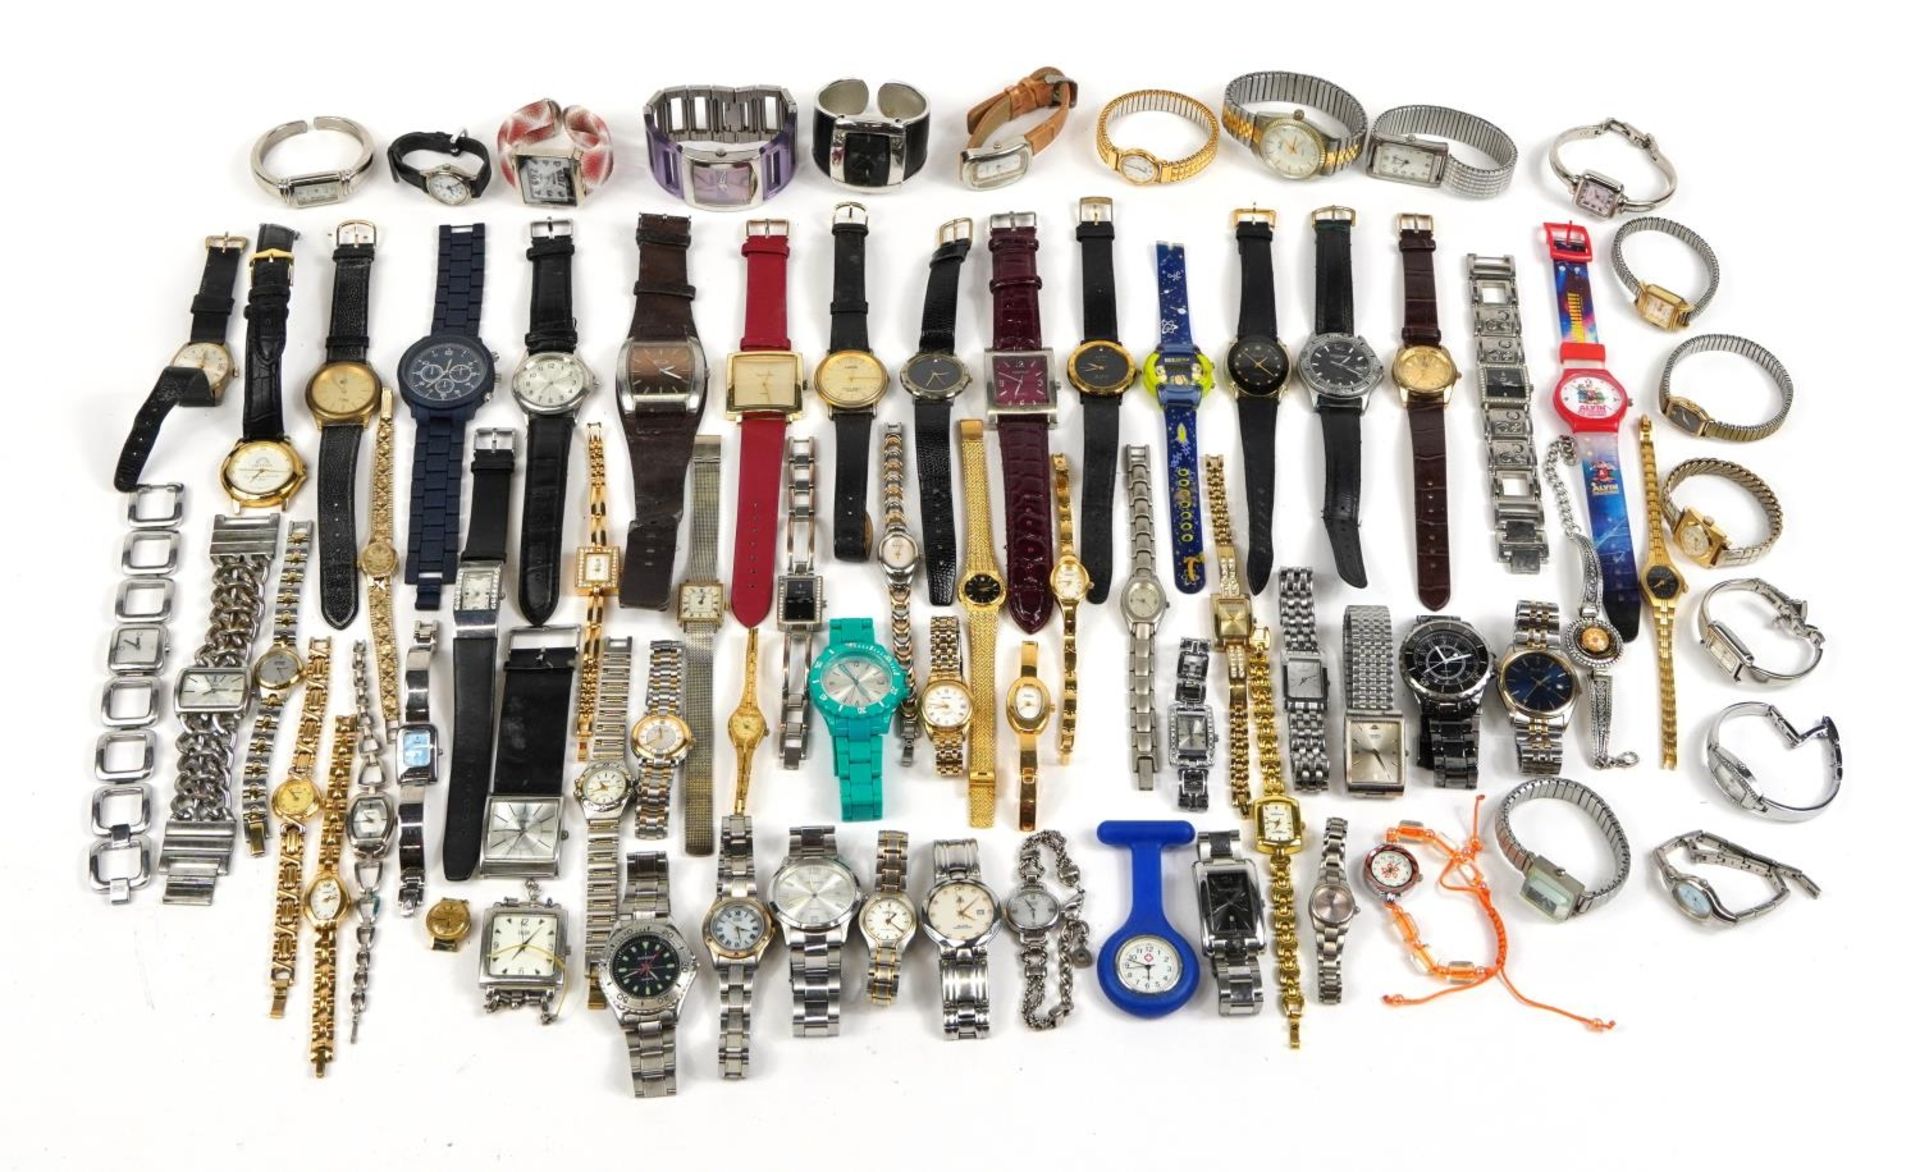 Vintage and later ladies and gentlemen's wristwatches including Sekonda, Seiko, Citizen and Oris